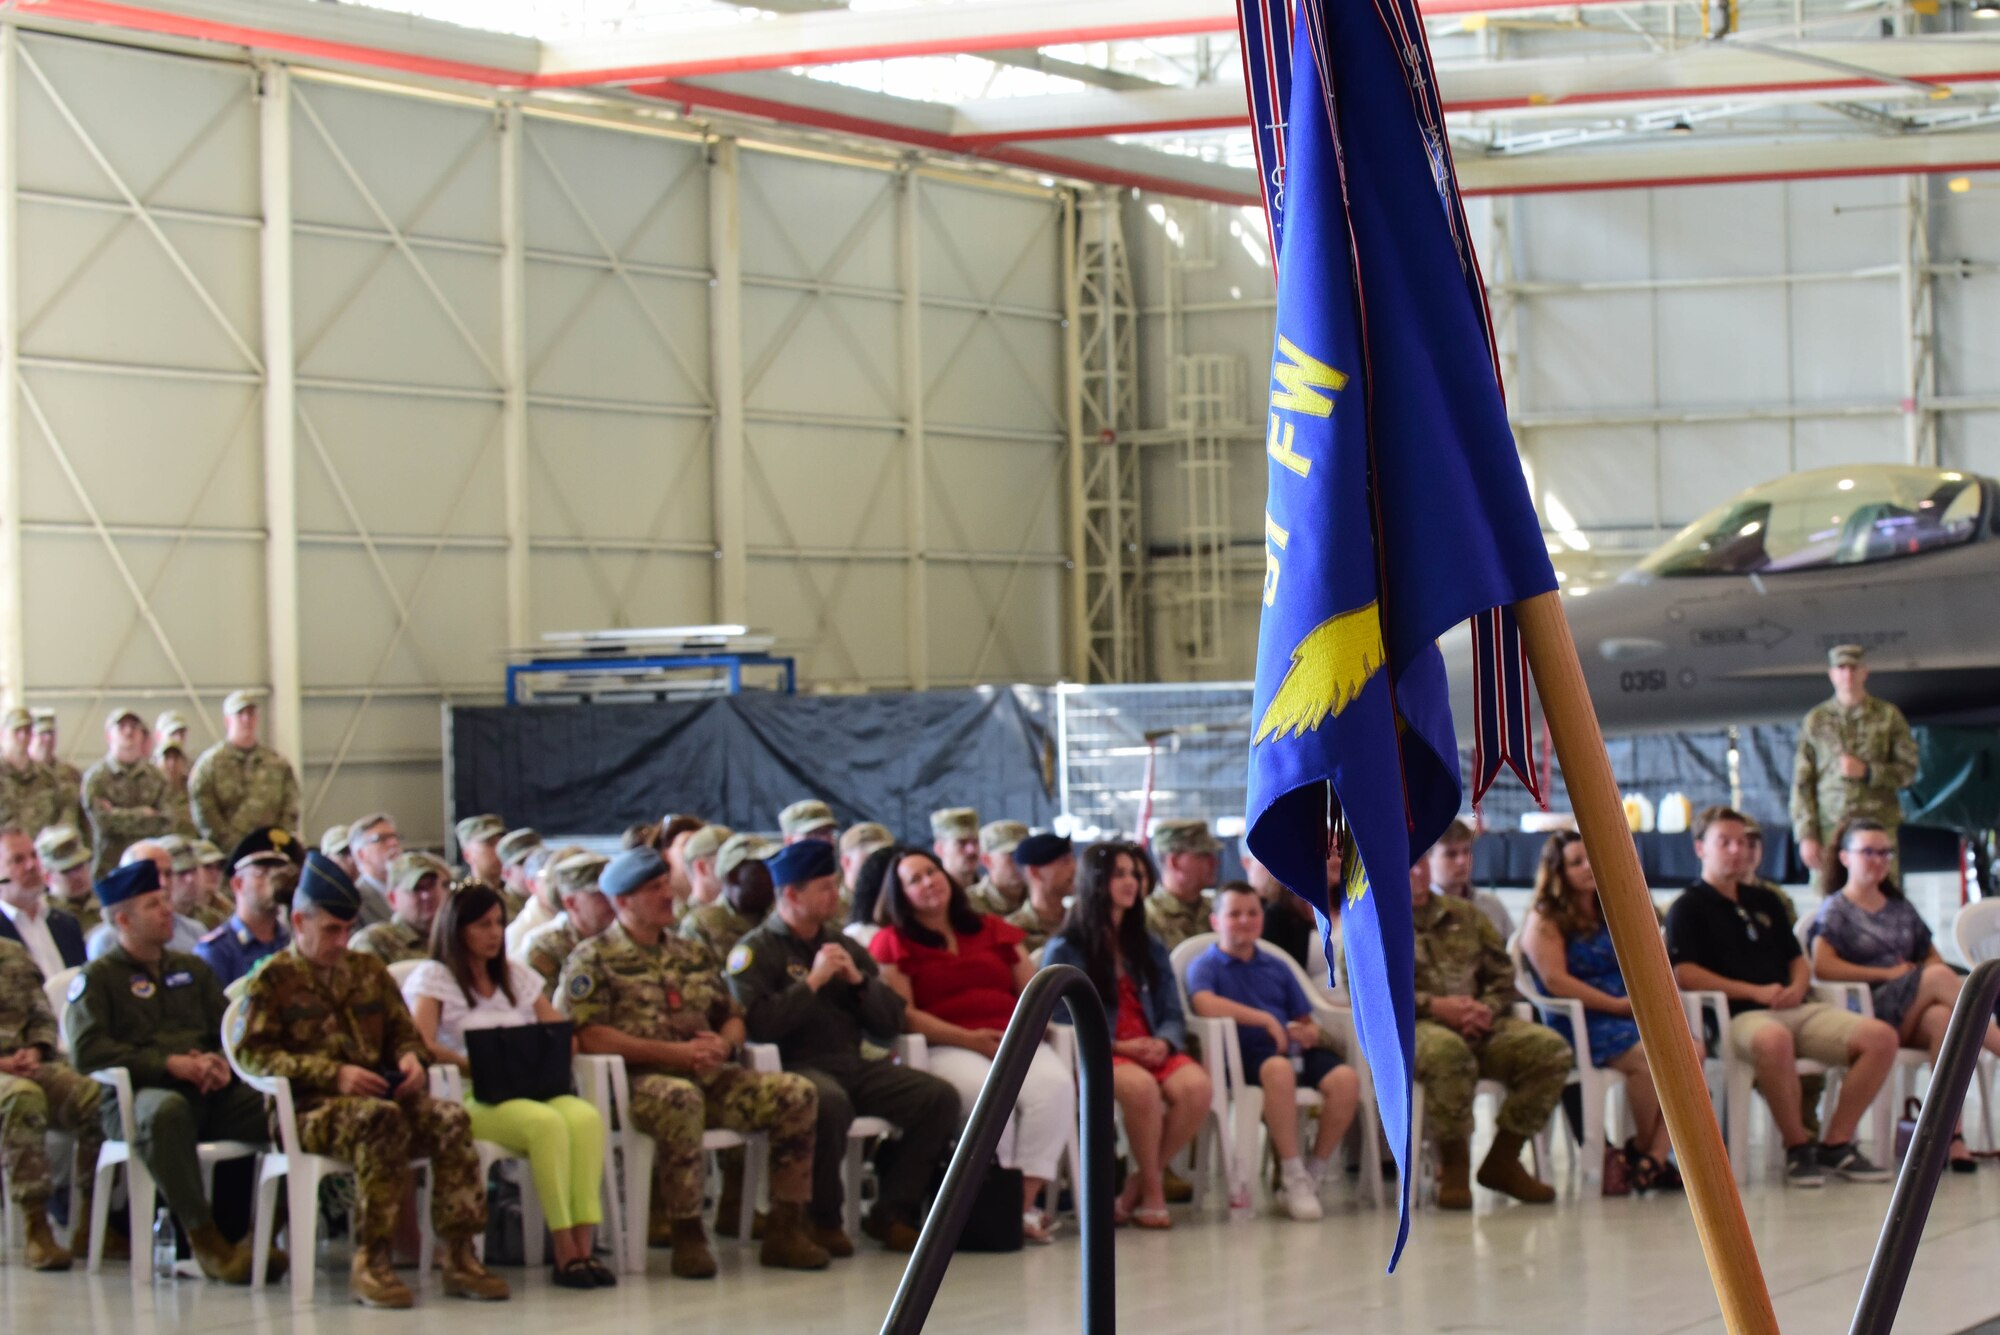 A 31st Maintenance Group guidon flag hangs during the 31st MXG change of command ceremony at Aviano Air Base, Italy, June 15, 2023. The mission of the 31st Maintenance Group is to provide peacetime and combat maintenance and munitions control, and executive support for the 31st Fighter Wing, geographically separated units under the command and control of the wing, and units gained during advanced stages of readiness. (U.S. Air Force photo by Airman Zachary Jakel)